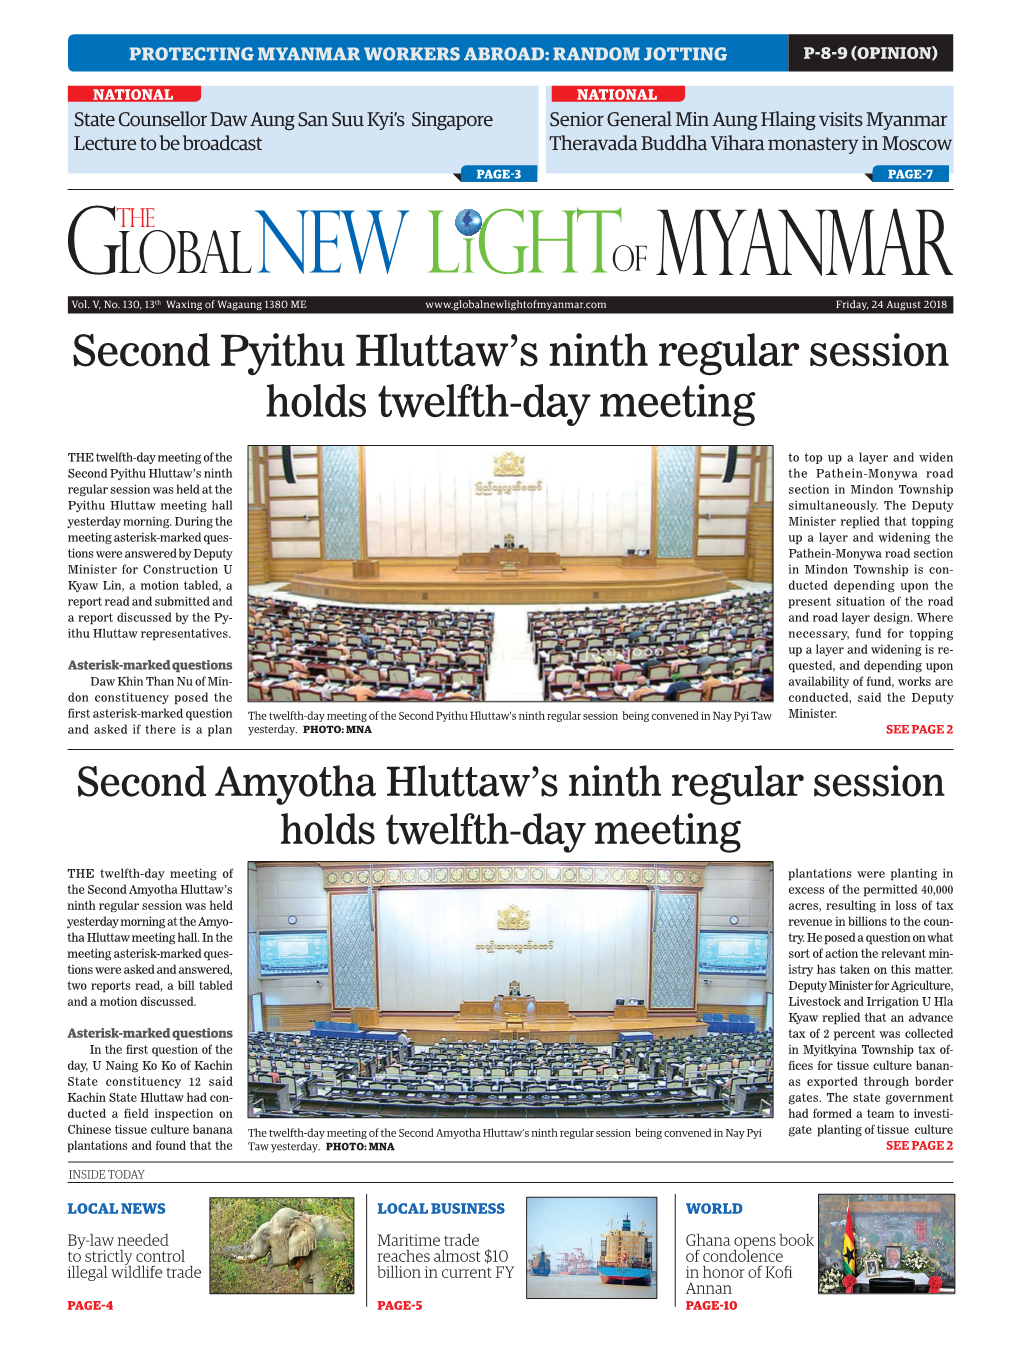 Second Pyithu Hluttaw's Ninth Regular Session Holds Twelfth-Day Meeting